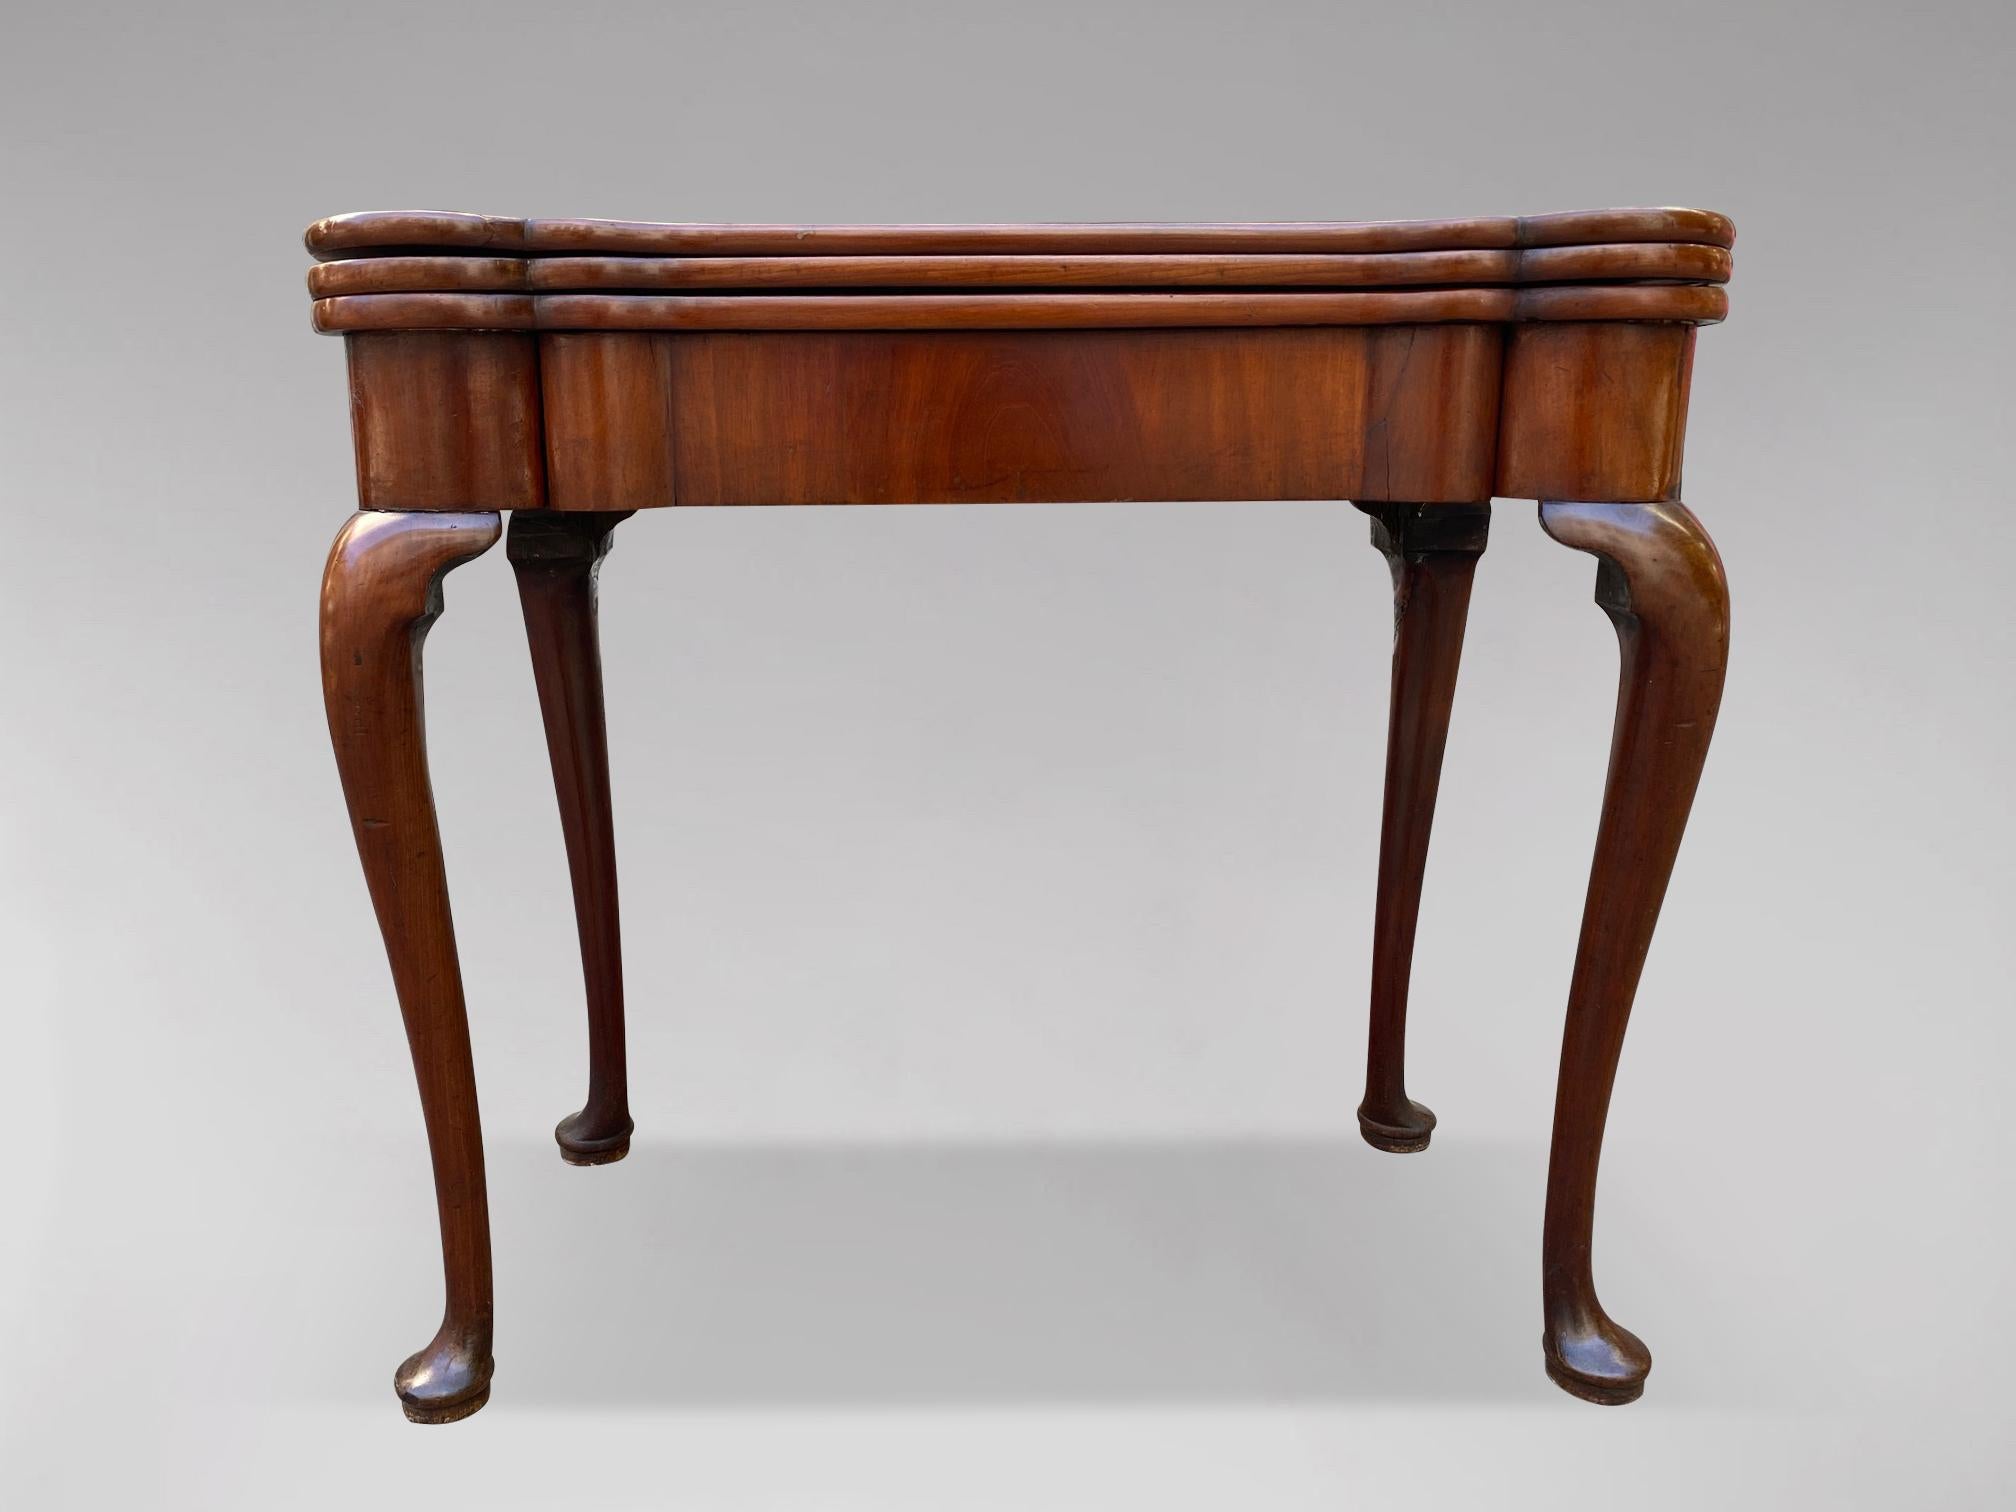 A stunning 18th century George II period mahogany triple fold over top card, tea or gaming table. The beautifully shaped Cuban mahogany top raised on shapely cabriole legs with ‘lappet’ carved knees and pad feet, the frieze fitted with a single